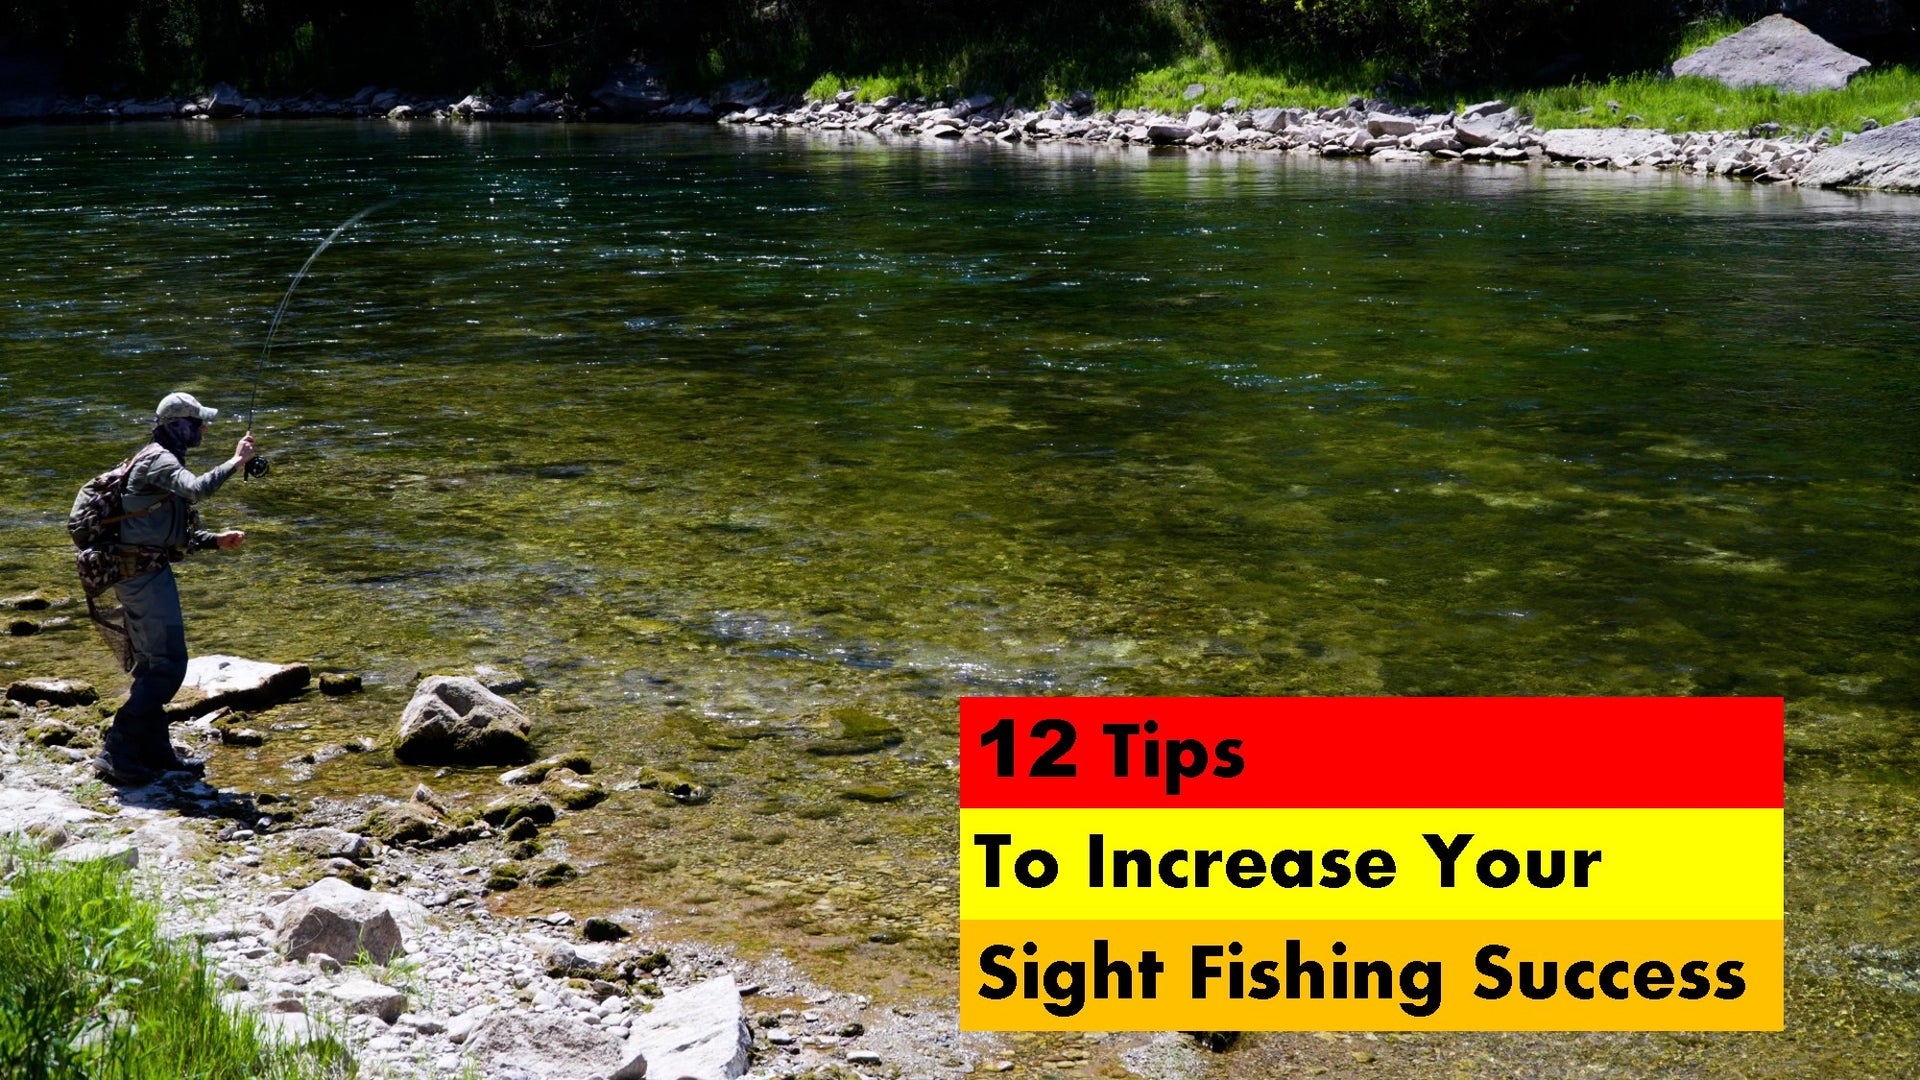 New  Video: 12 Tips to Increase Your Sight Fishing Success